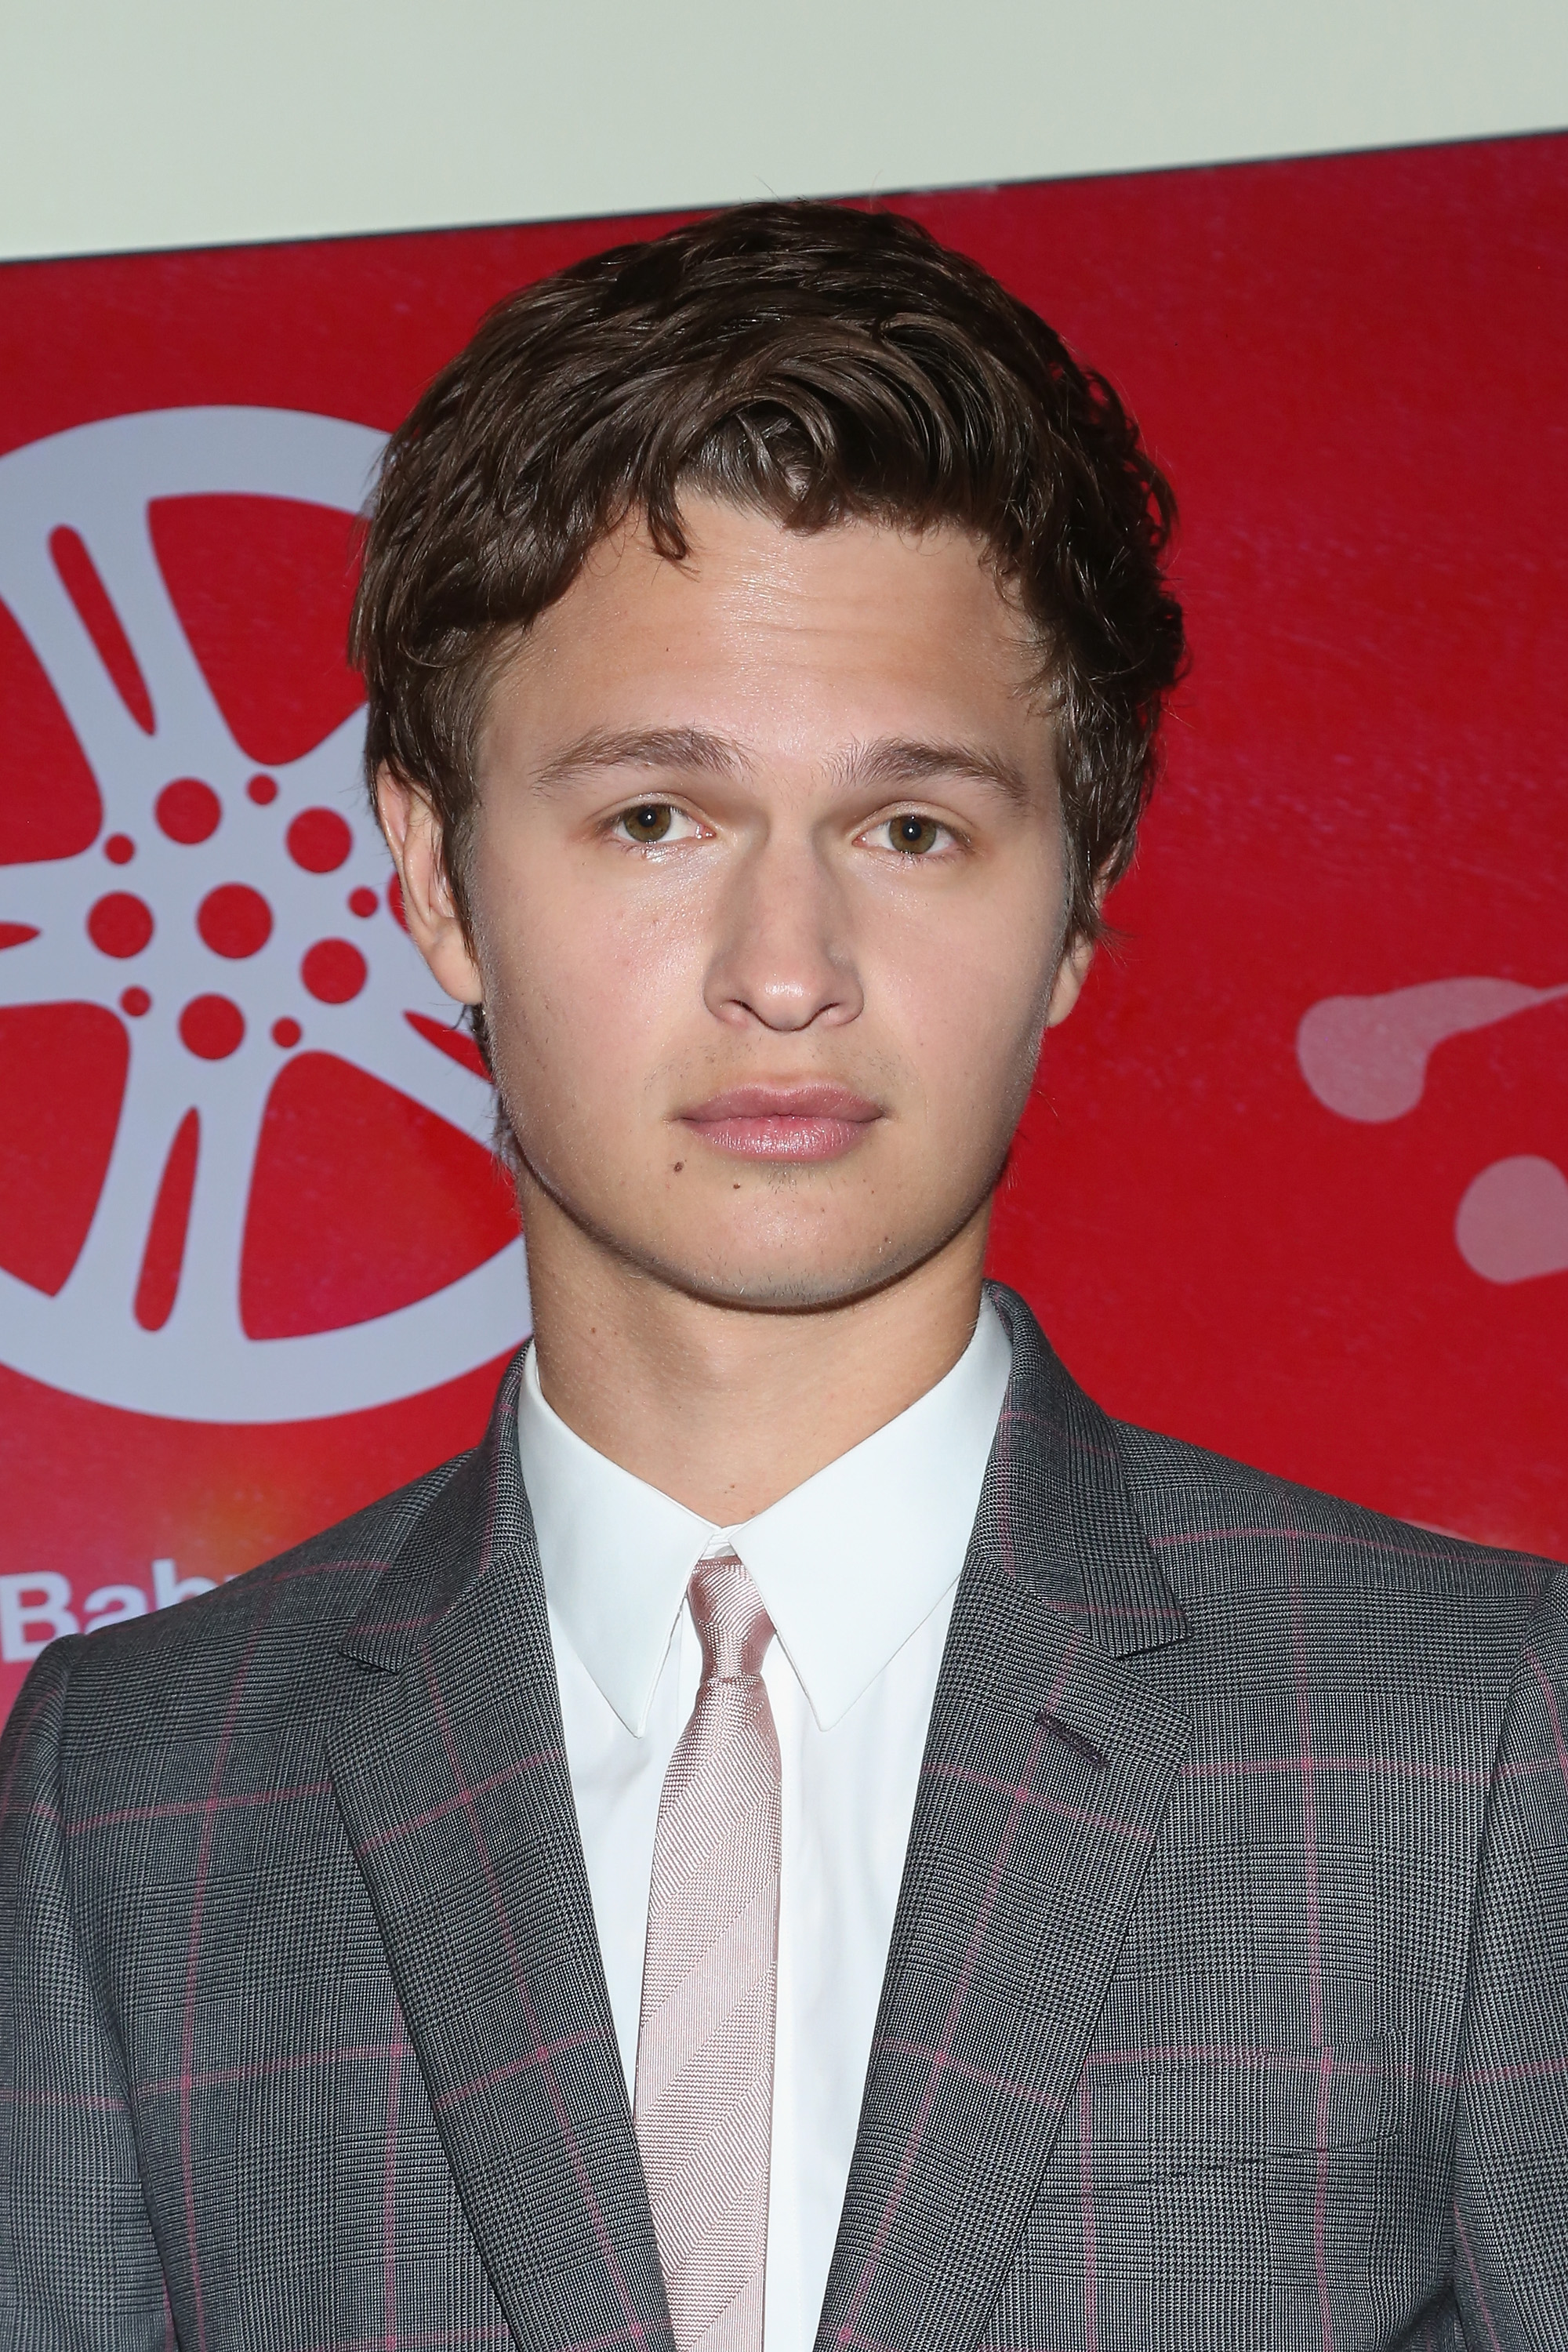 Ansel Elgort attends the "Baby Driver" premiere at Cinemex Antara Polanco on July 26, 2017, in Mexico City, Mexico. | Source: Getty Images